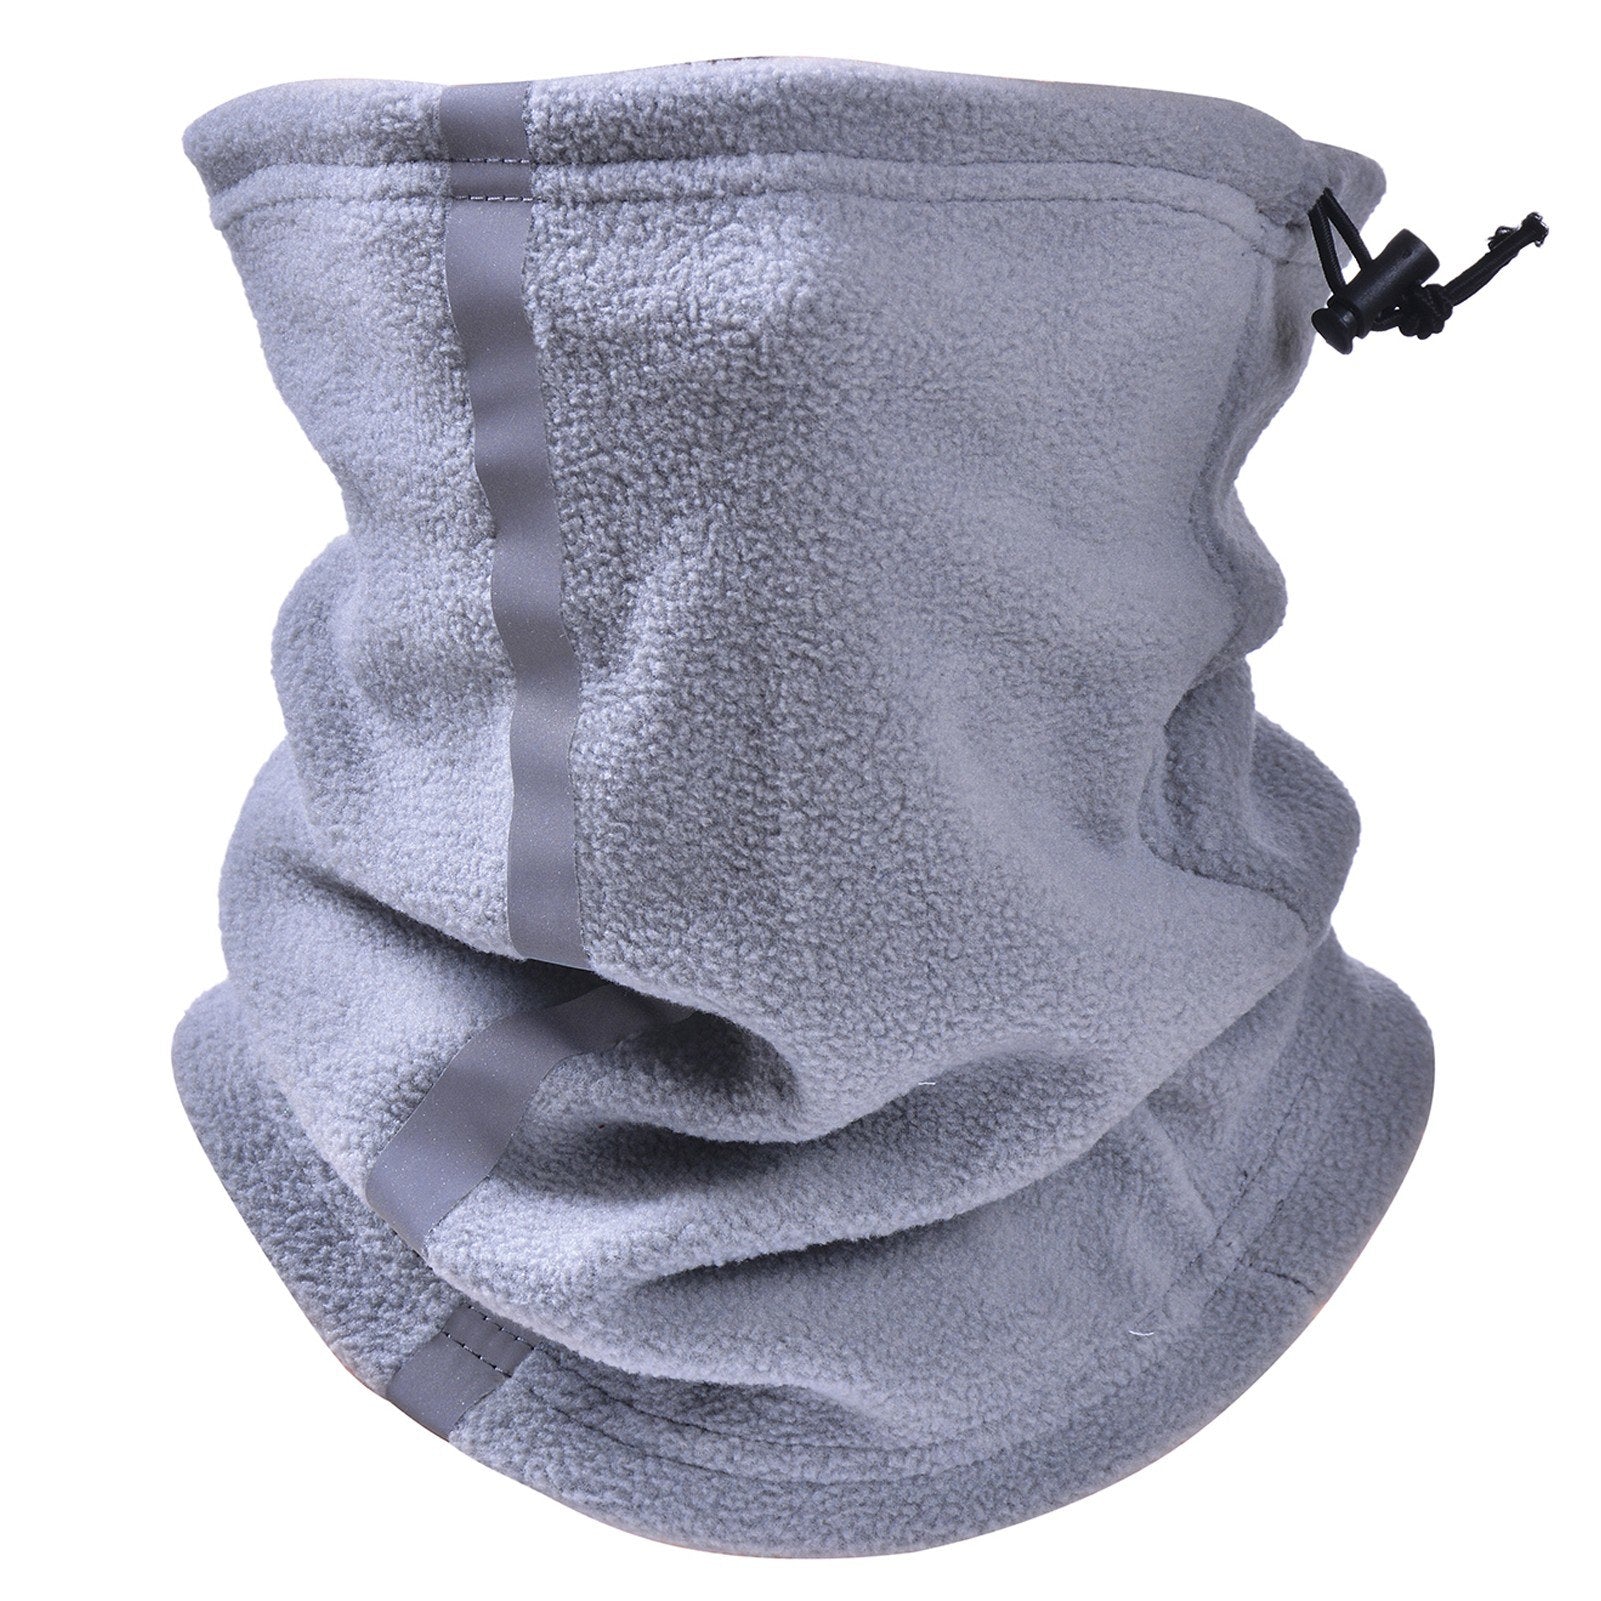 Adjustable Fleece Neck Gaiter Warmer Reflective Safety Face Cover Balaclava Winter Warm Outdoor Sport Scarf for Men and Women Skiing Cycling Running